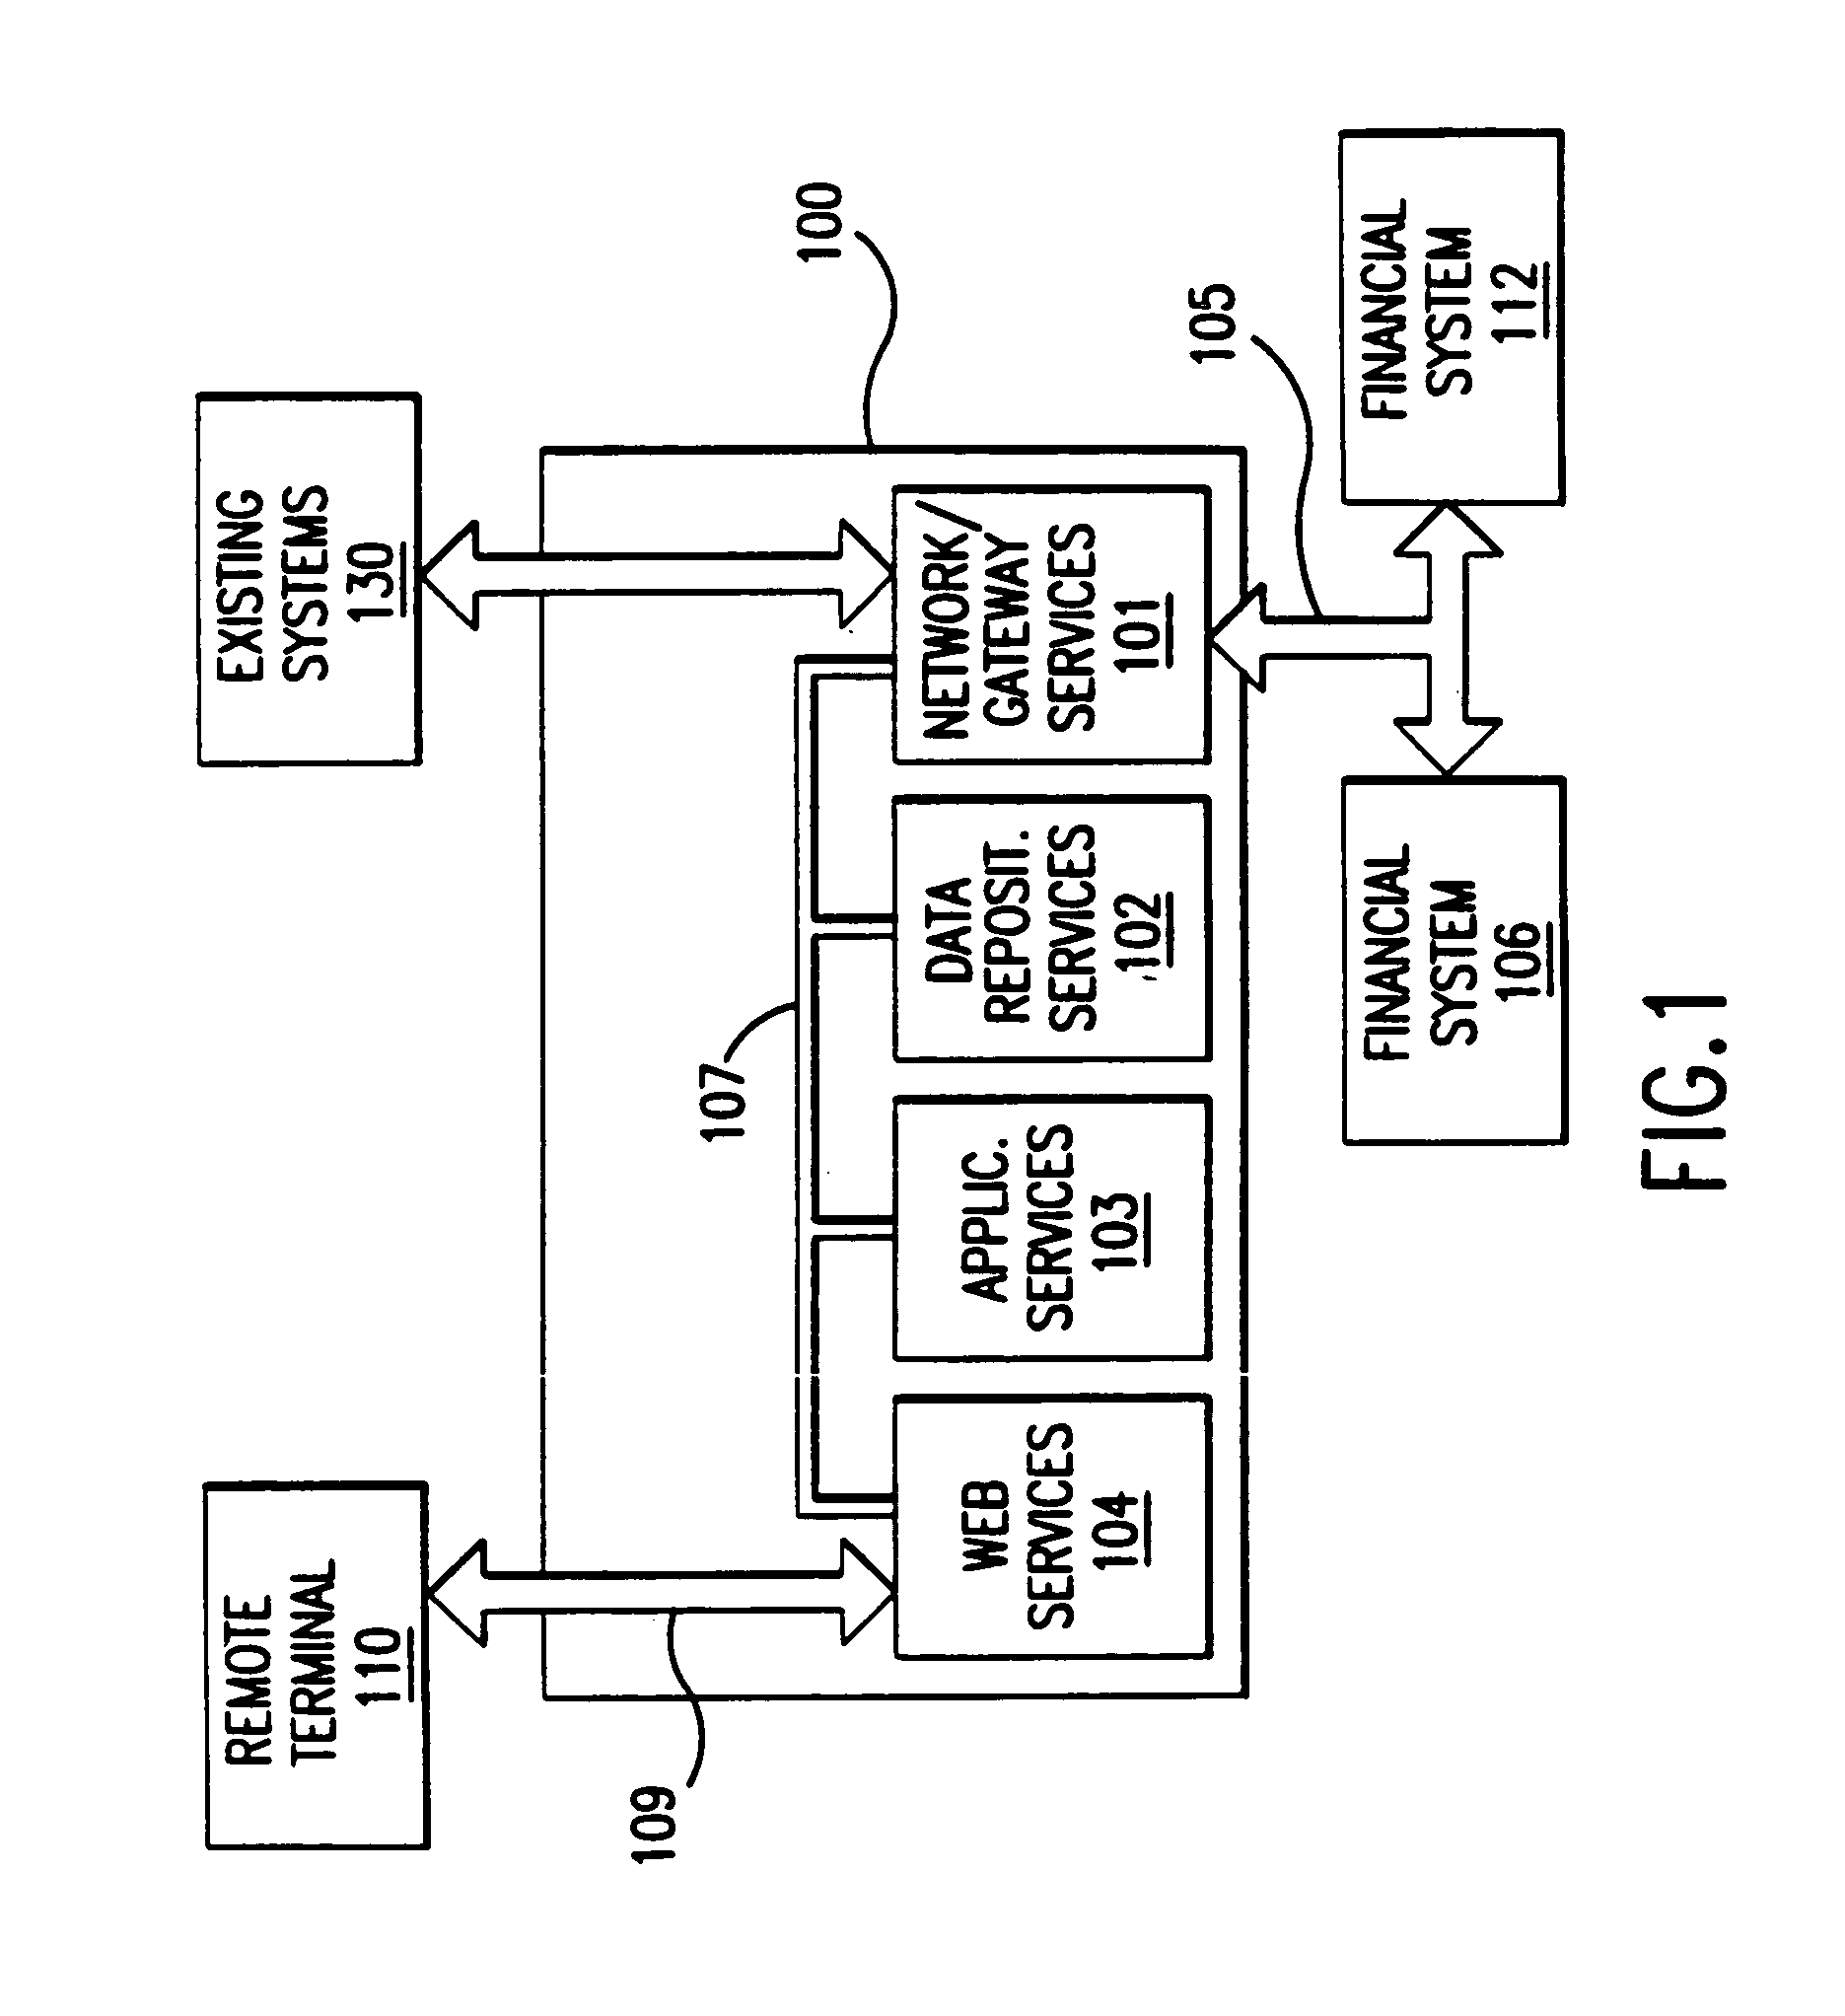 Open-architecture system for real-time consolidation of information from multiple financial systems